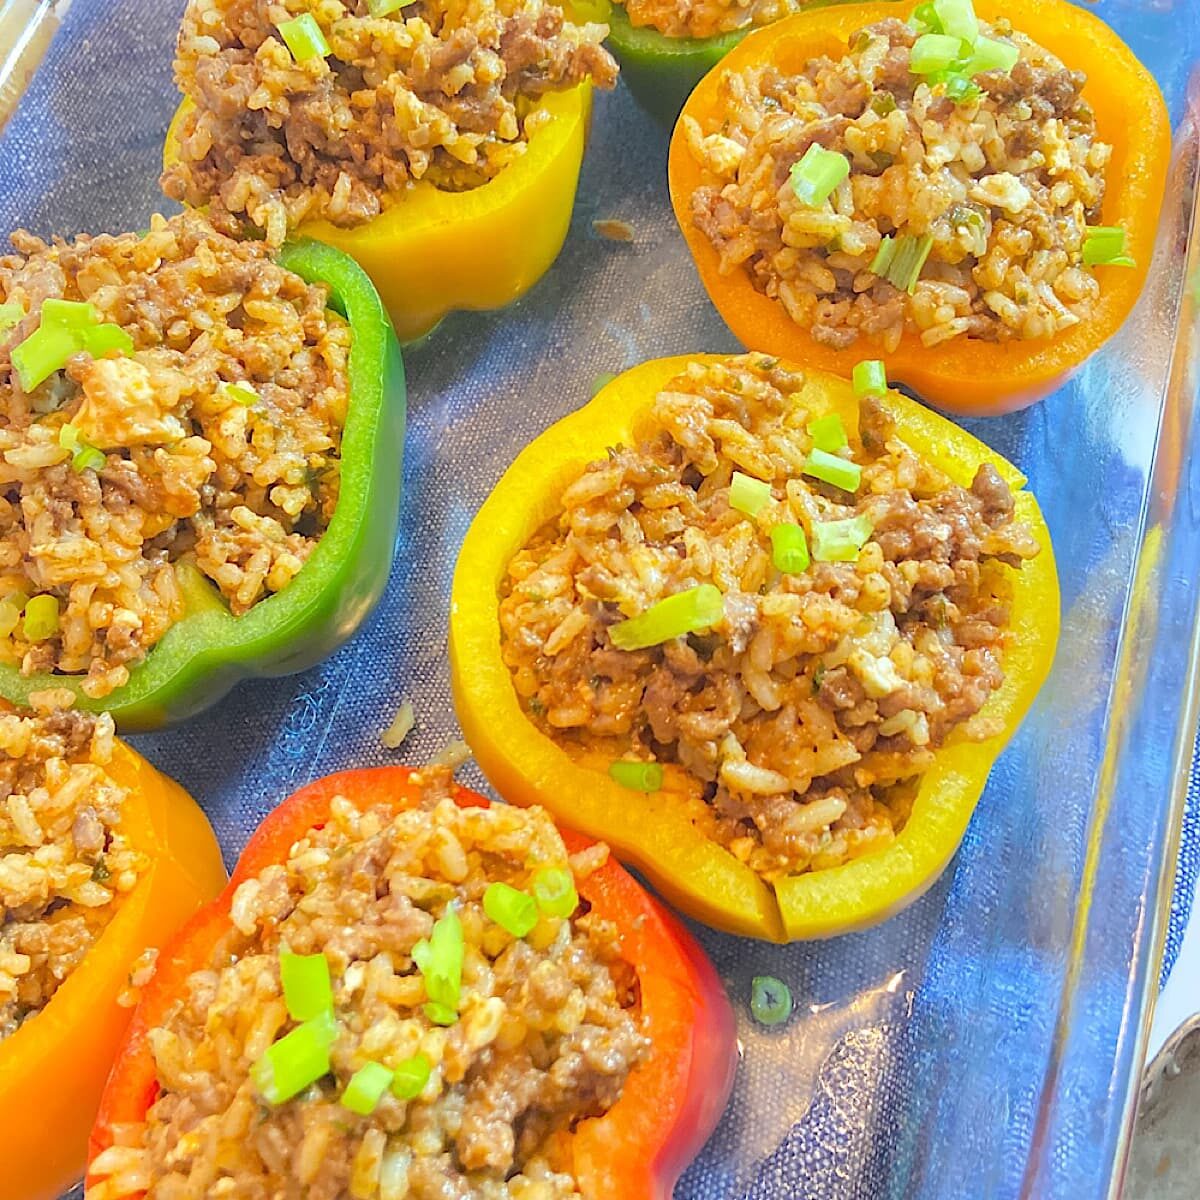 Stuffed bell peppers ready to bake.